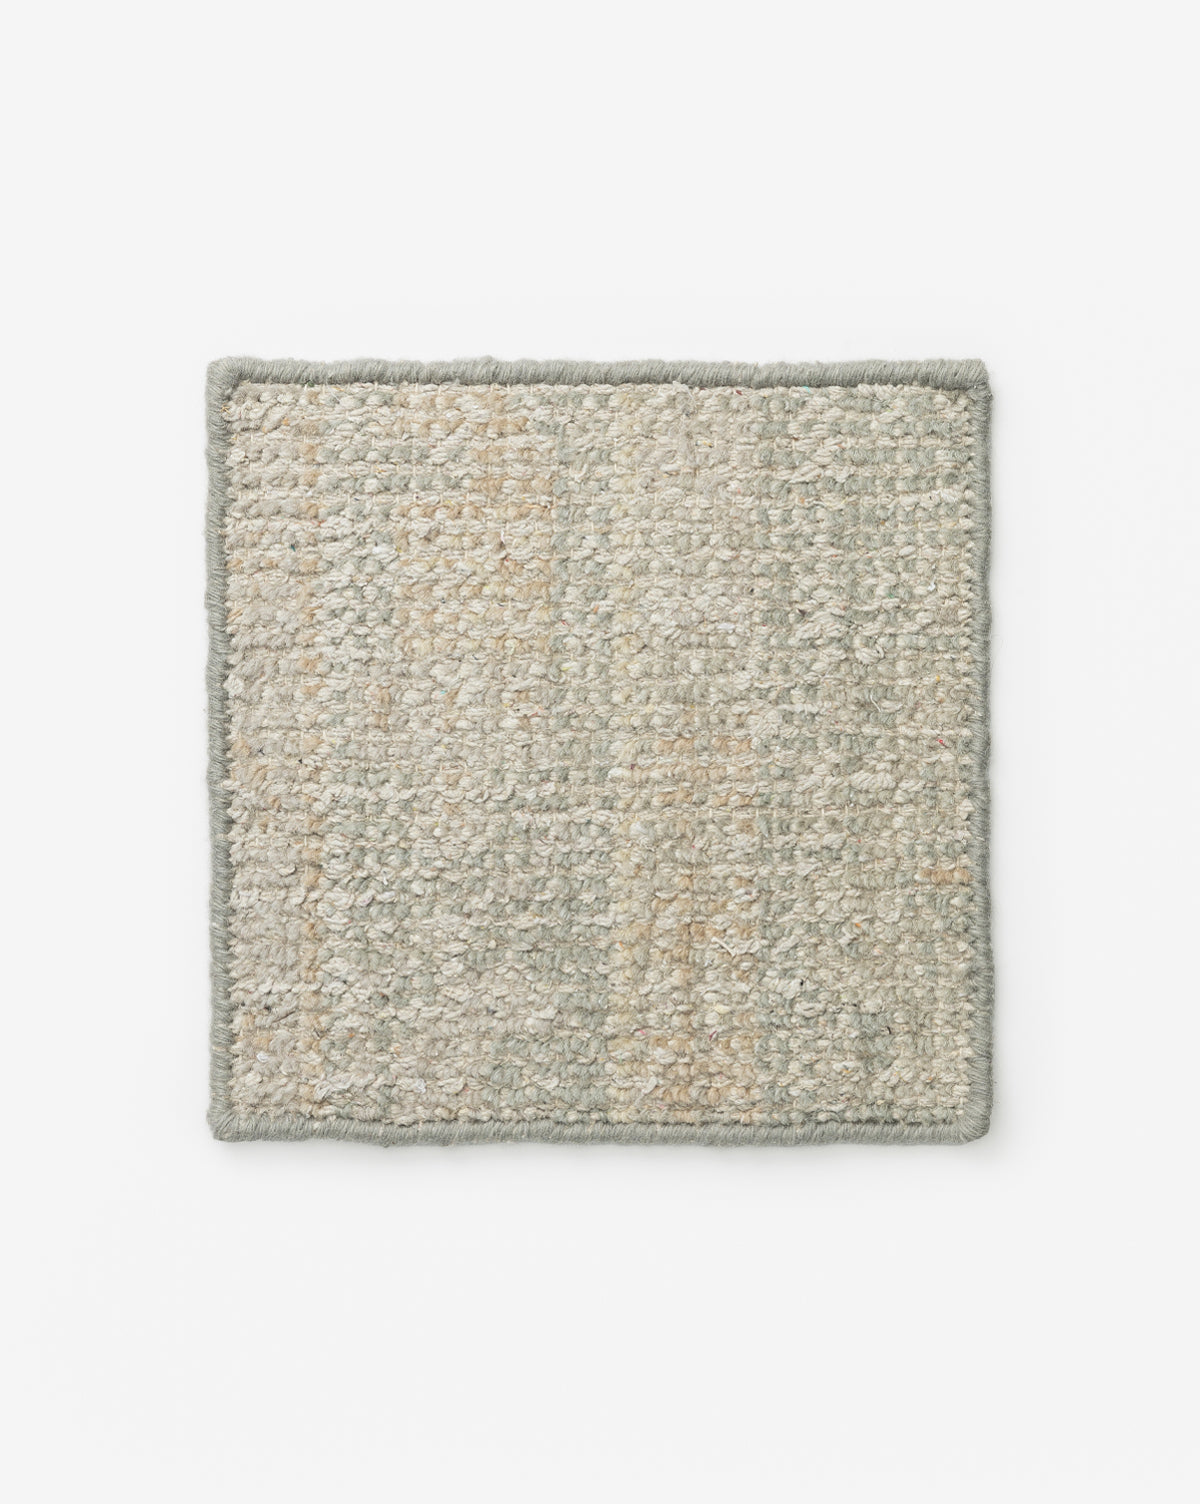 Obeetee, Roslin Hand-Knotted Wool Rug Swatch